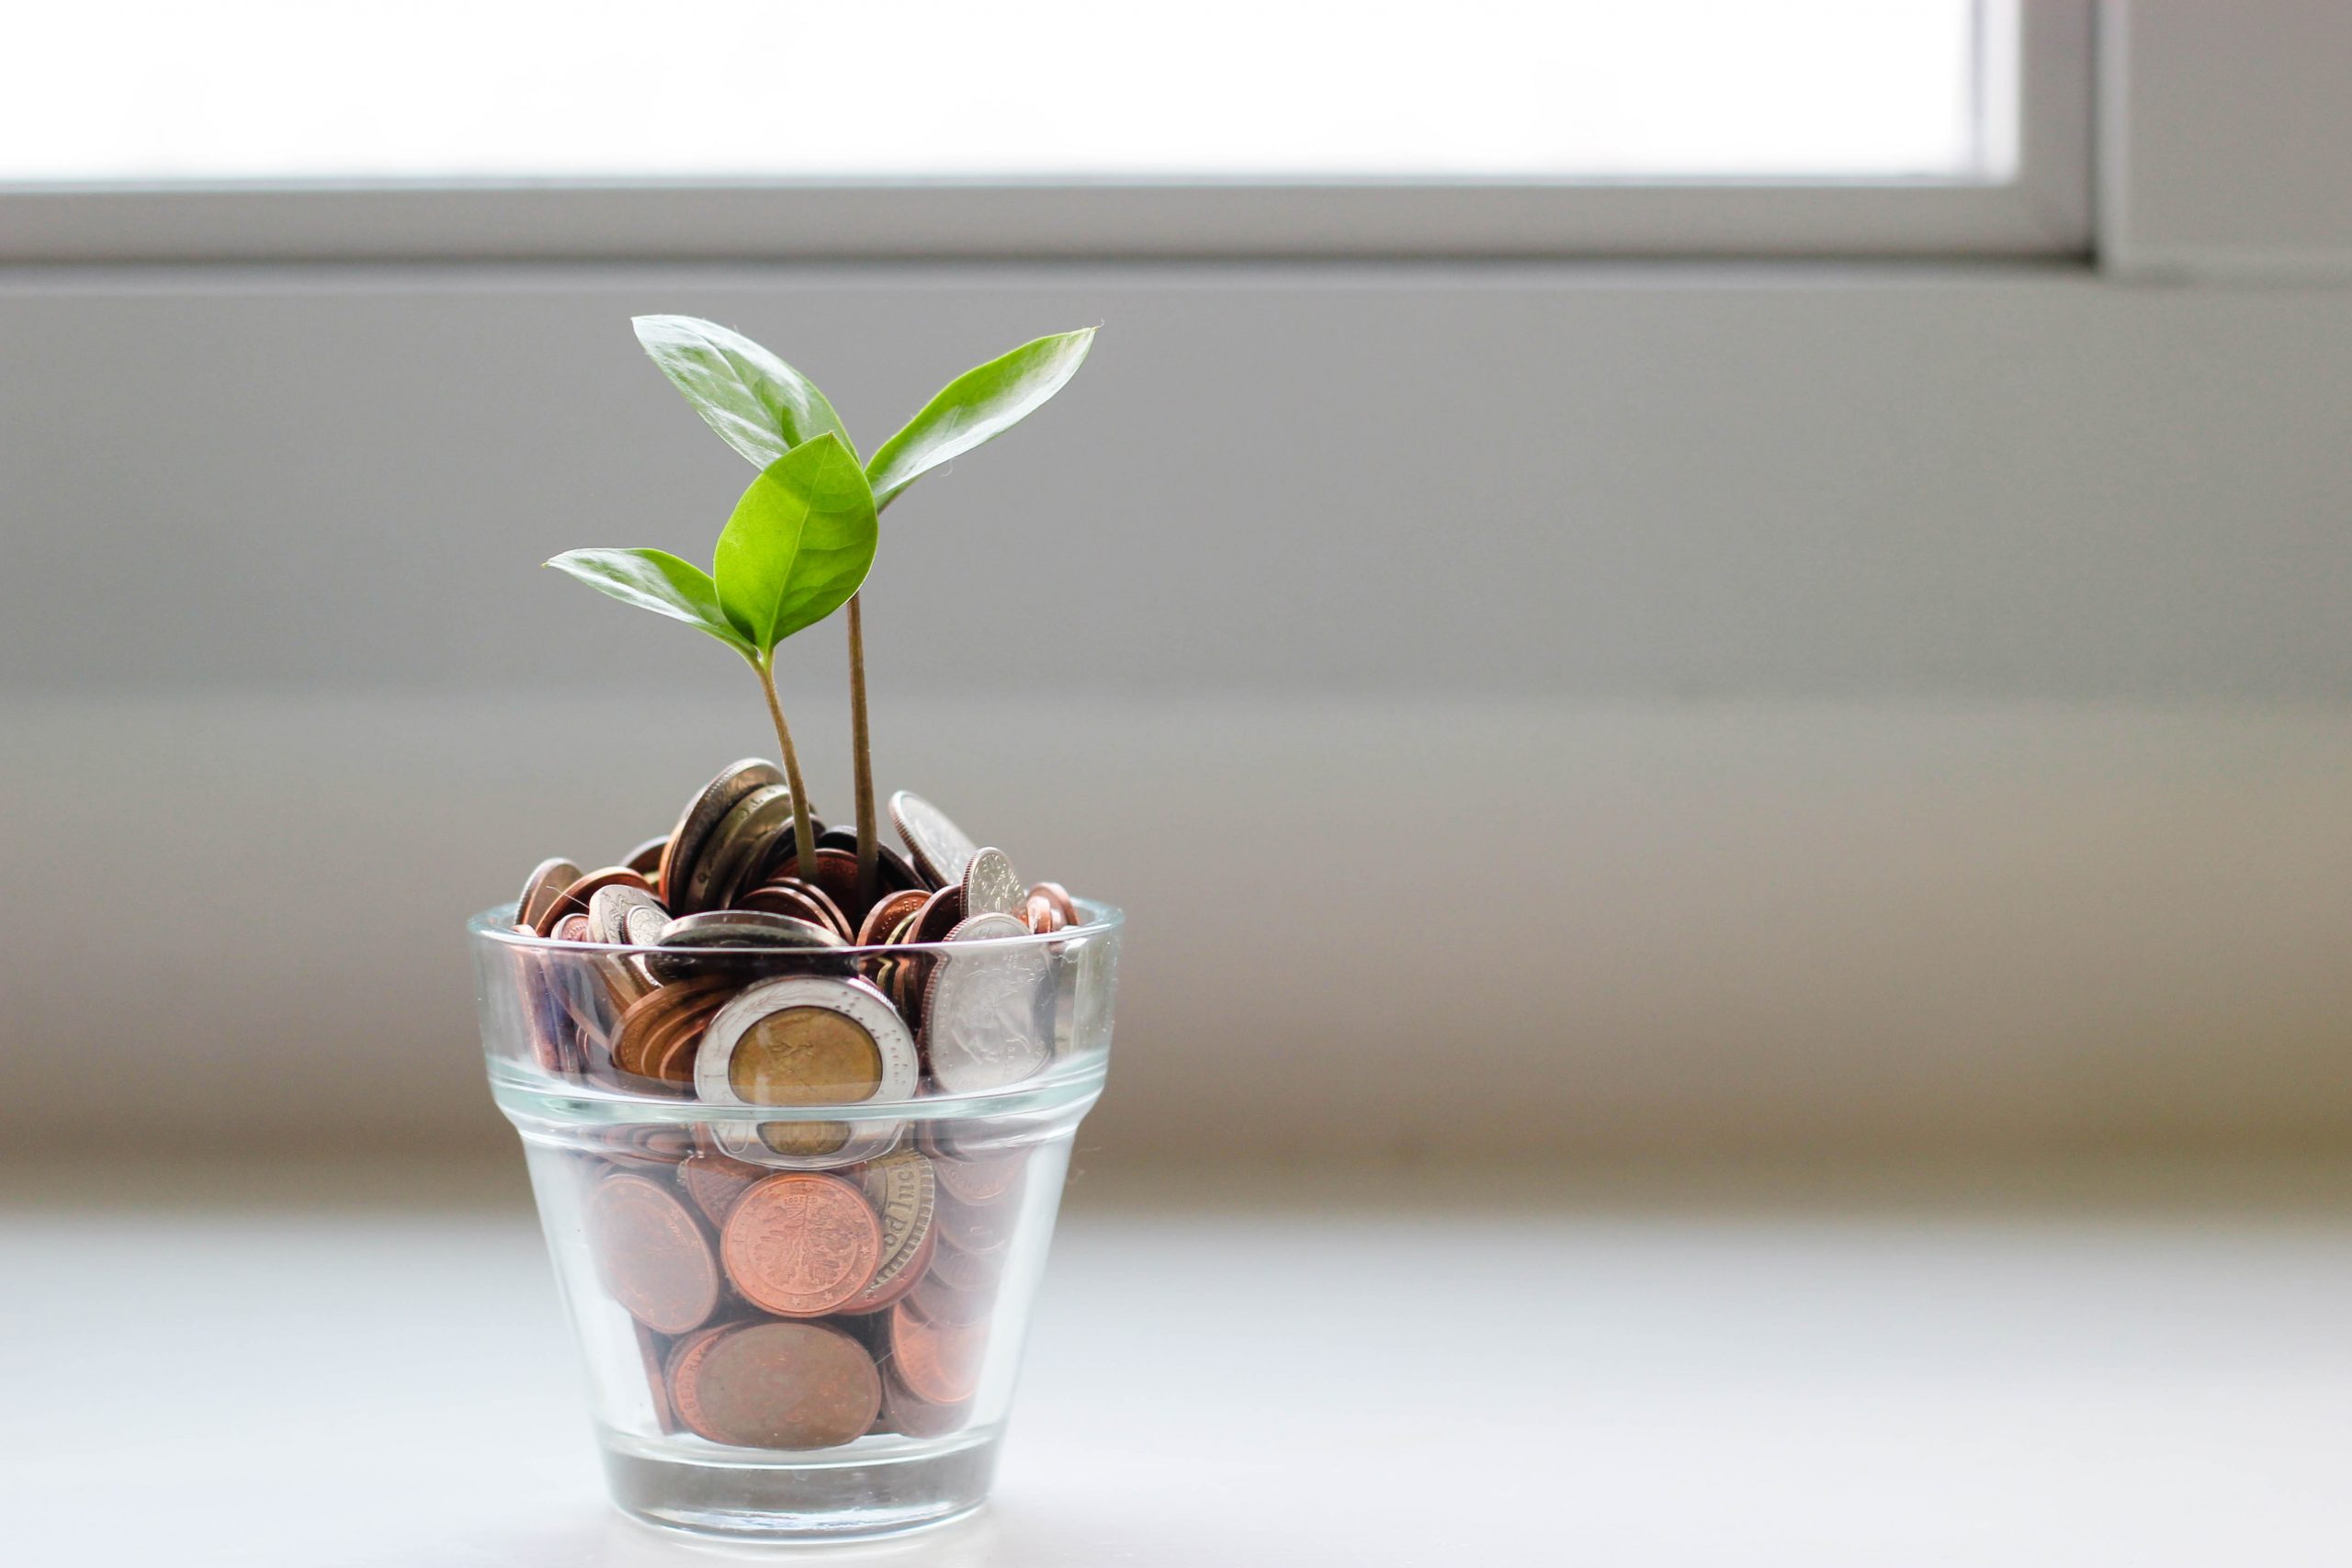 Jar of coins with small plant growing